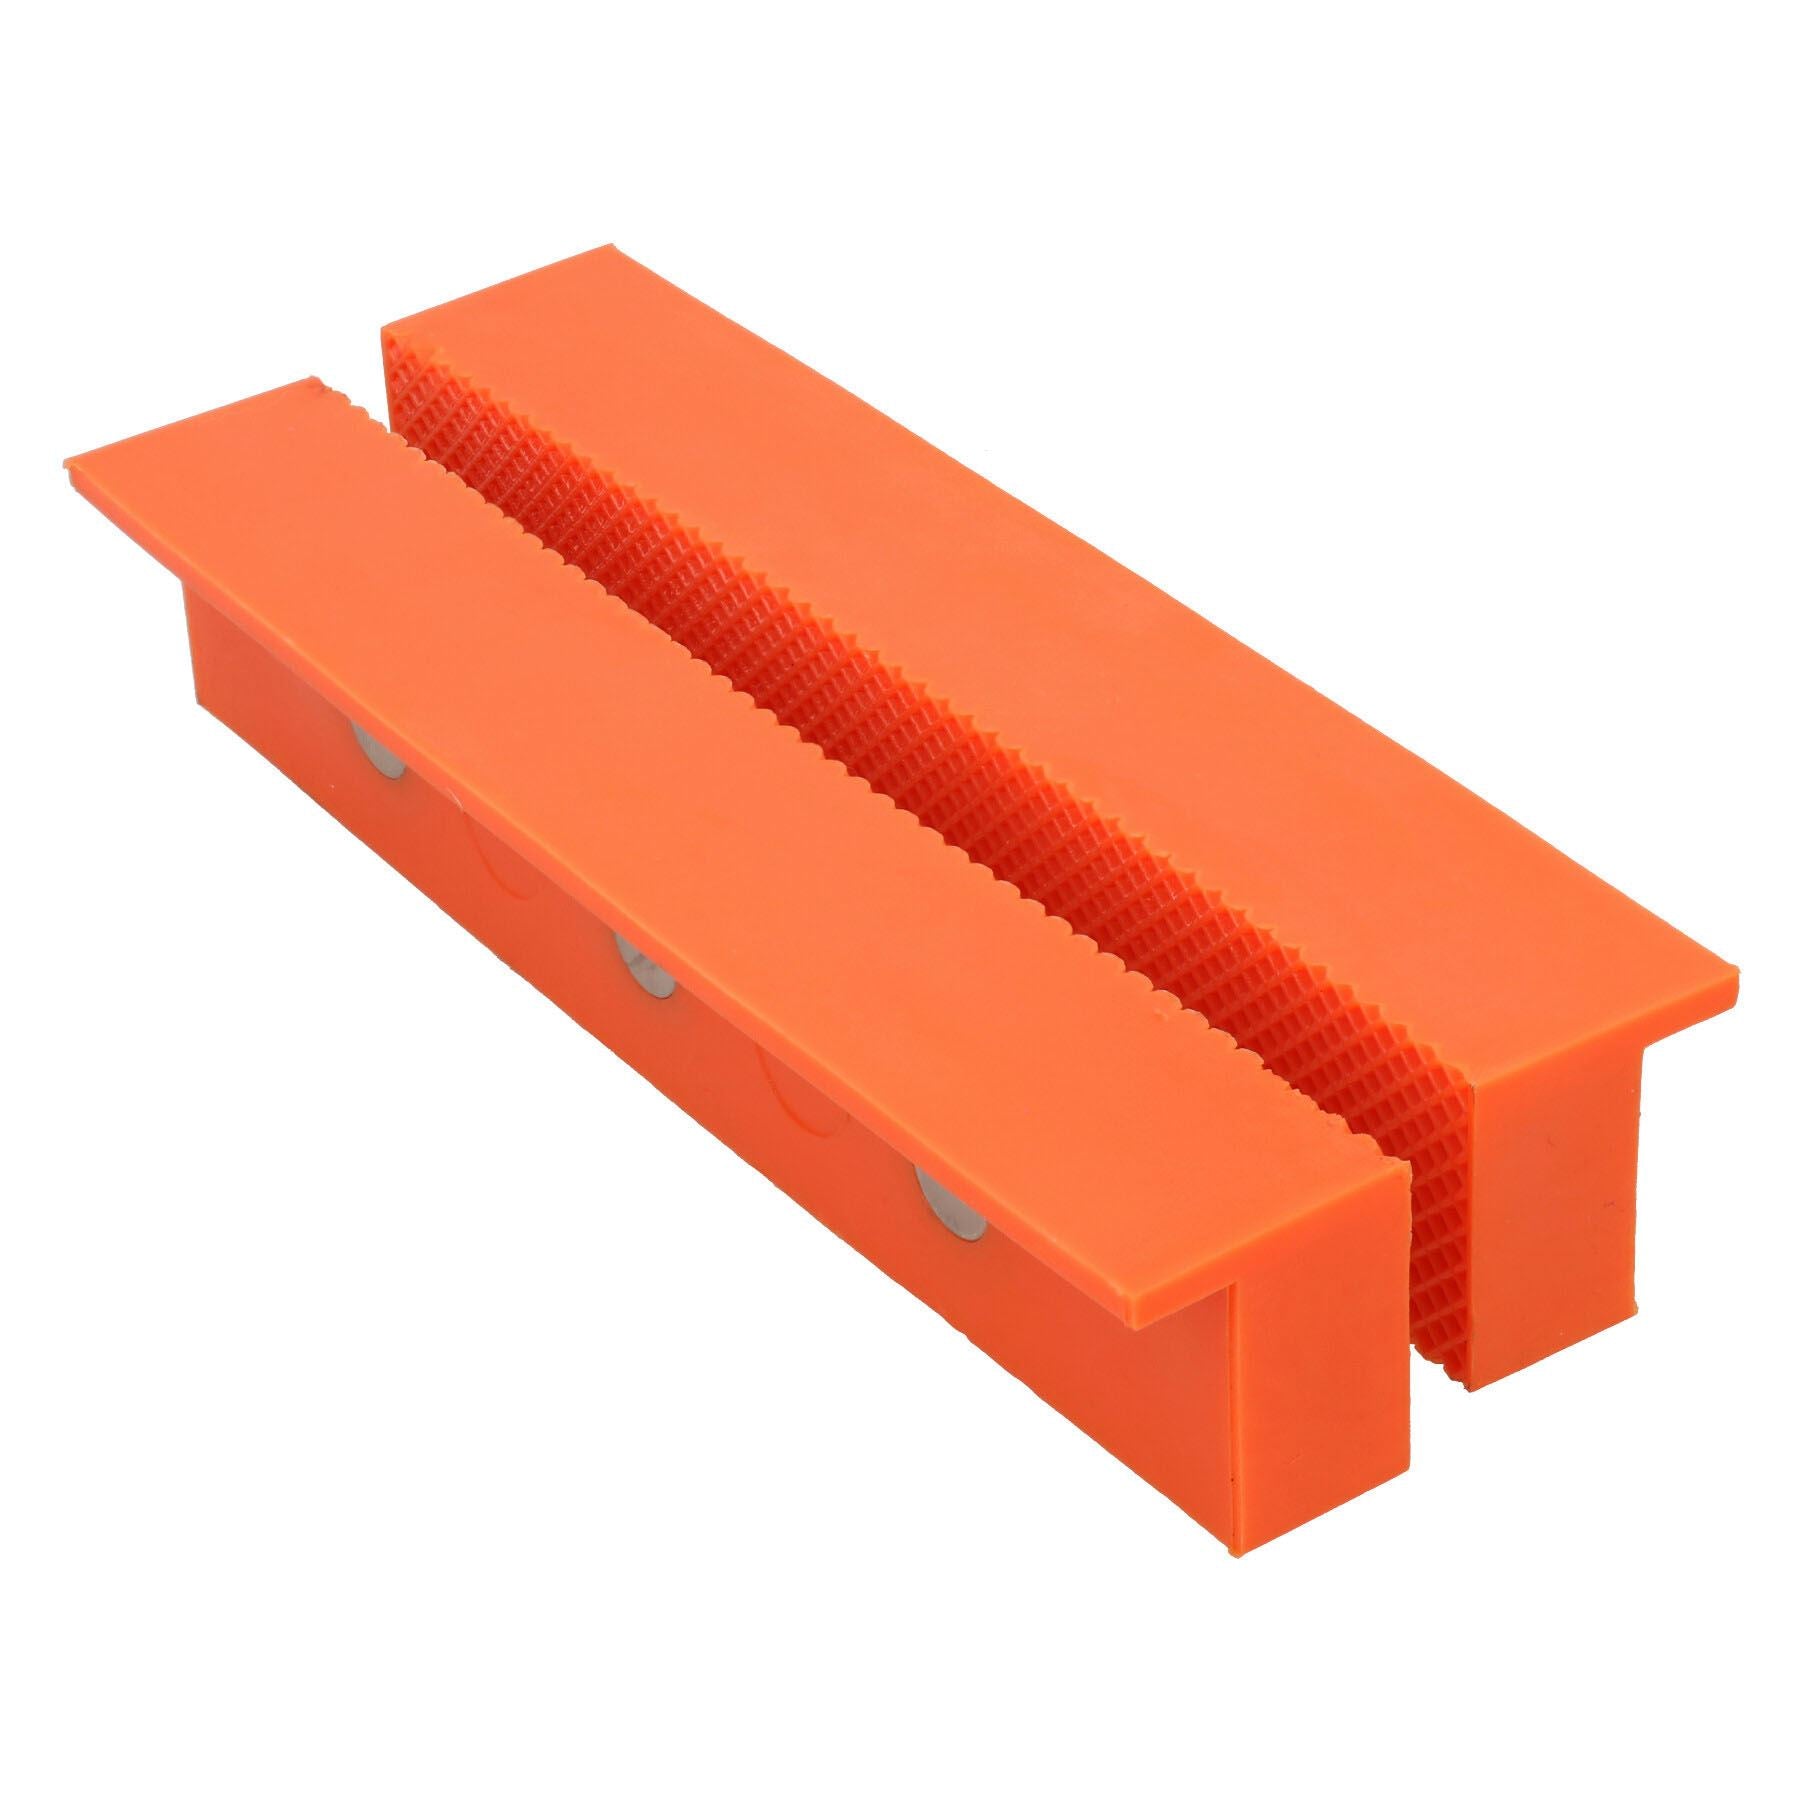 Magnetic Soft face Jaws Pads for Bench Vice Non marking 6” / 150mm Orange